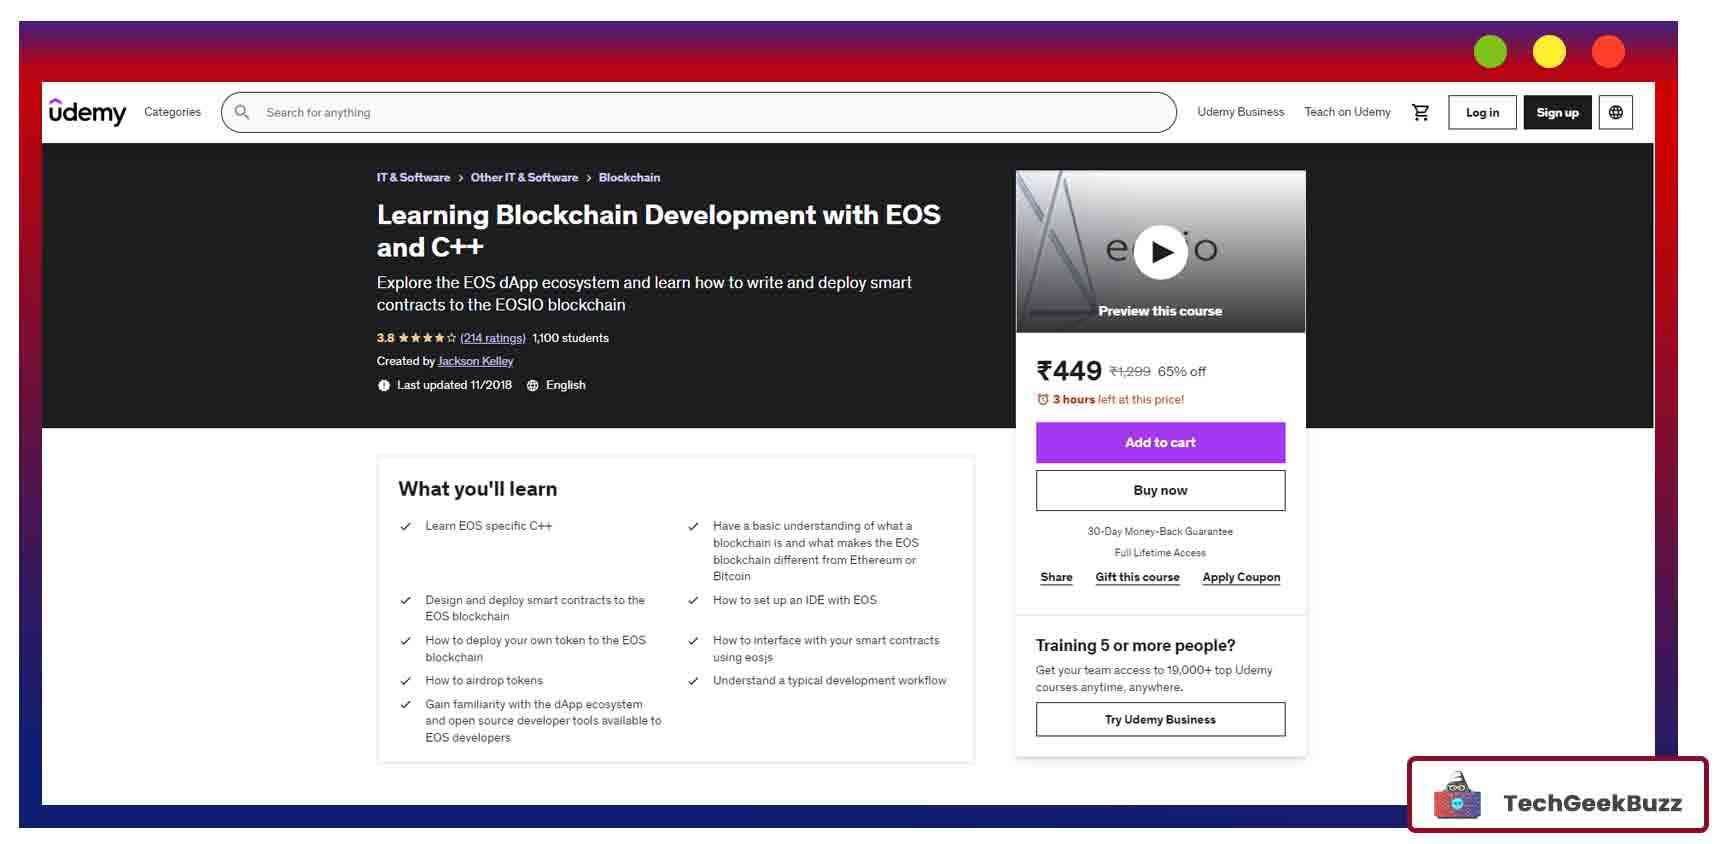  Learning Blockchain Development with EOS and C++